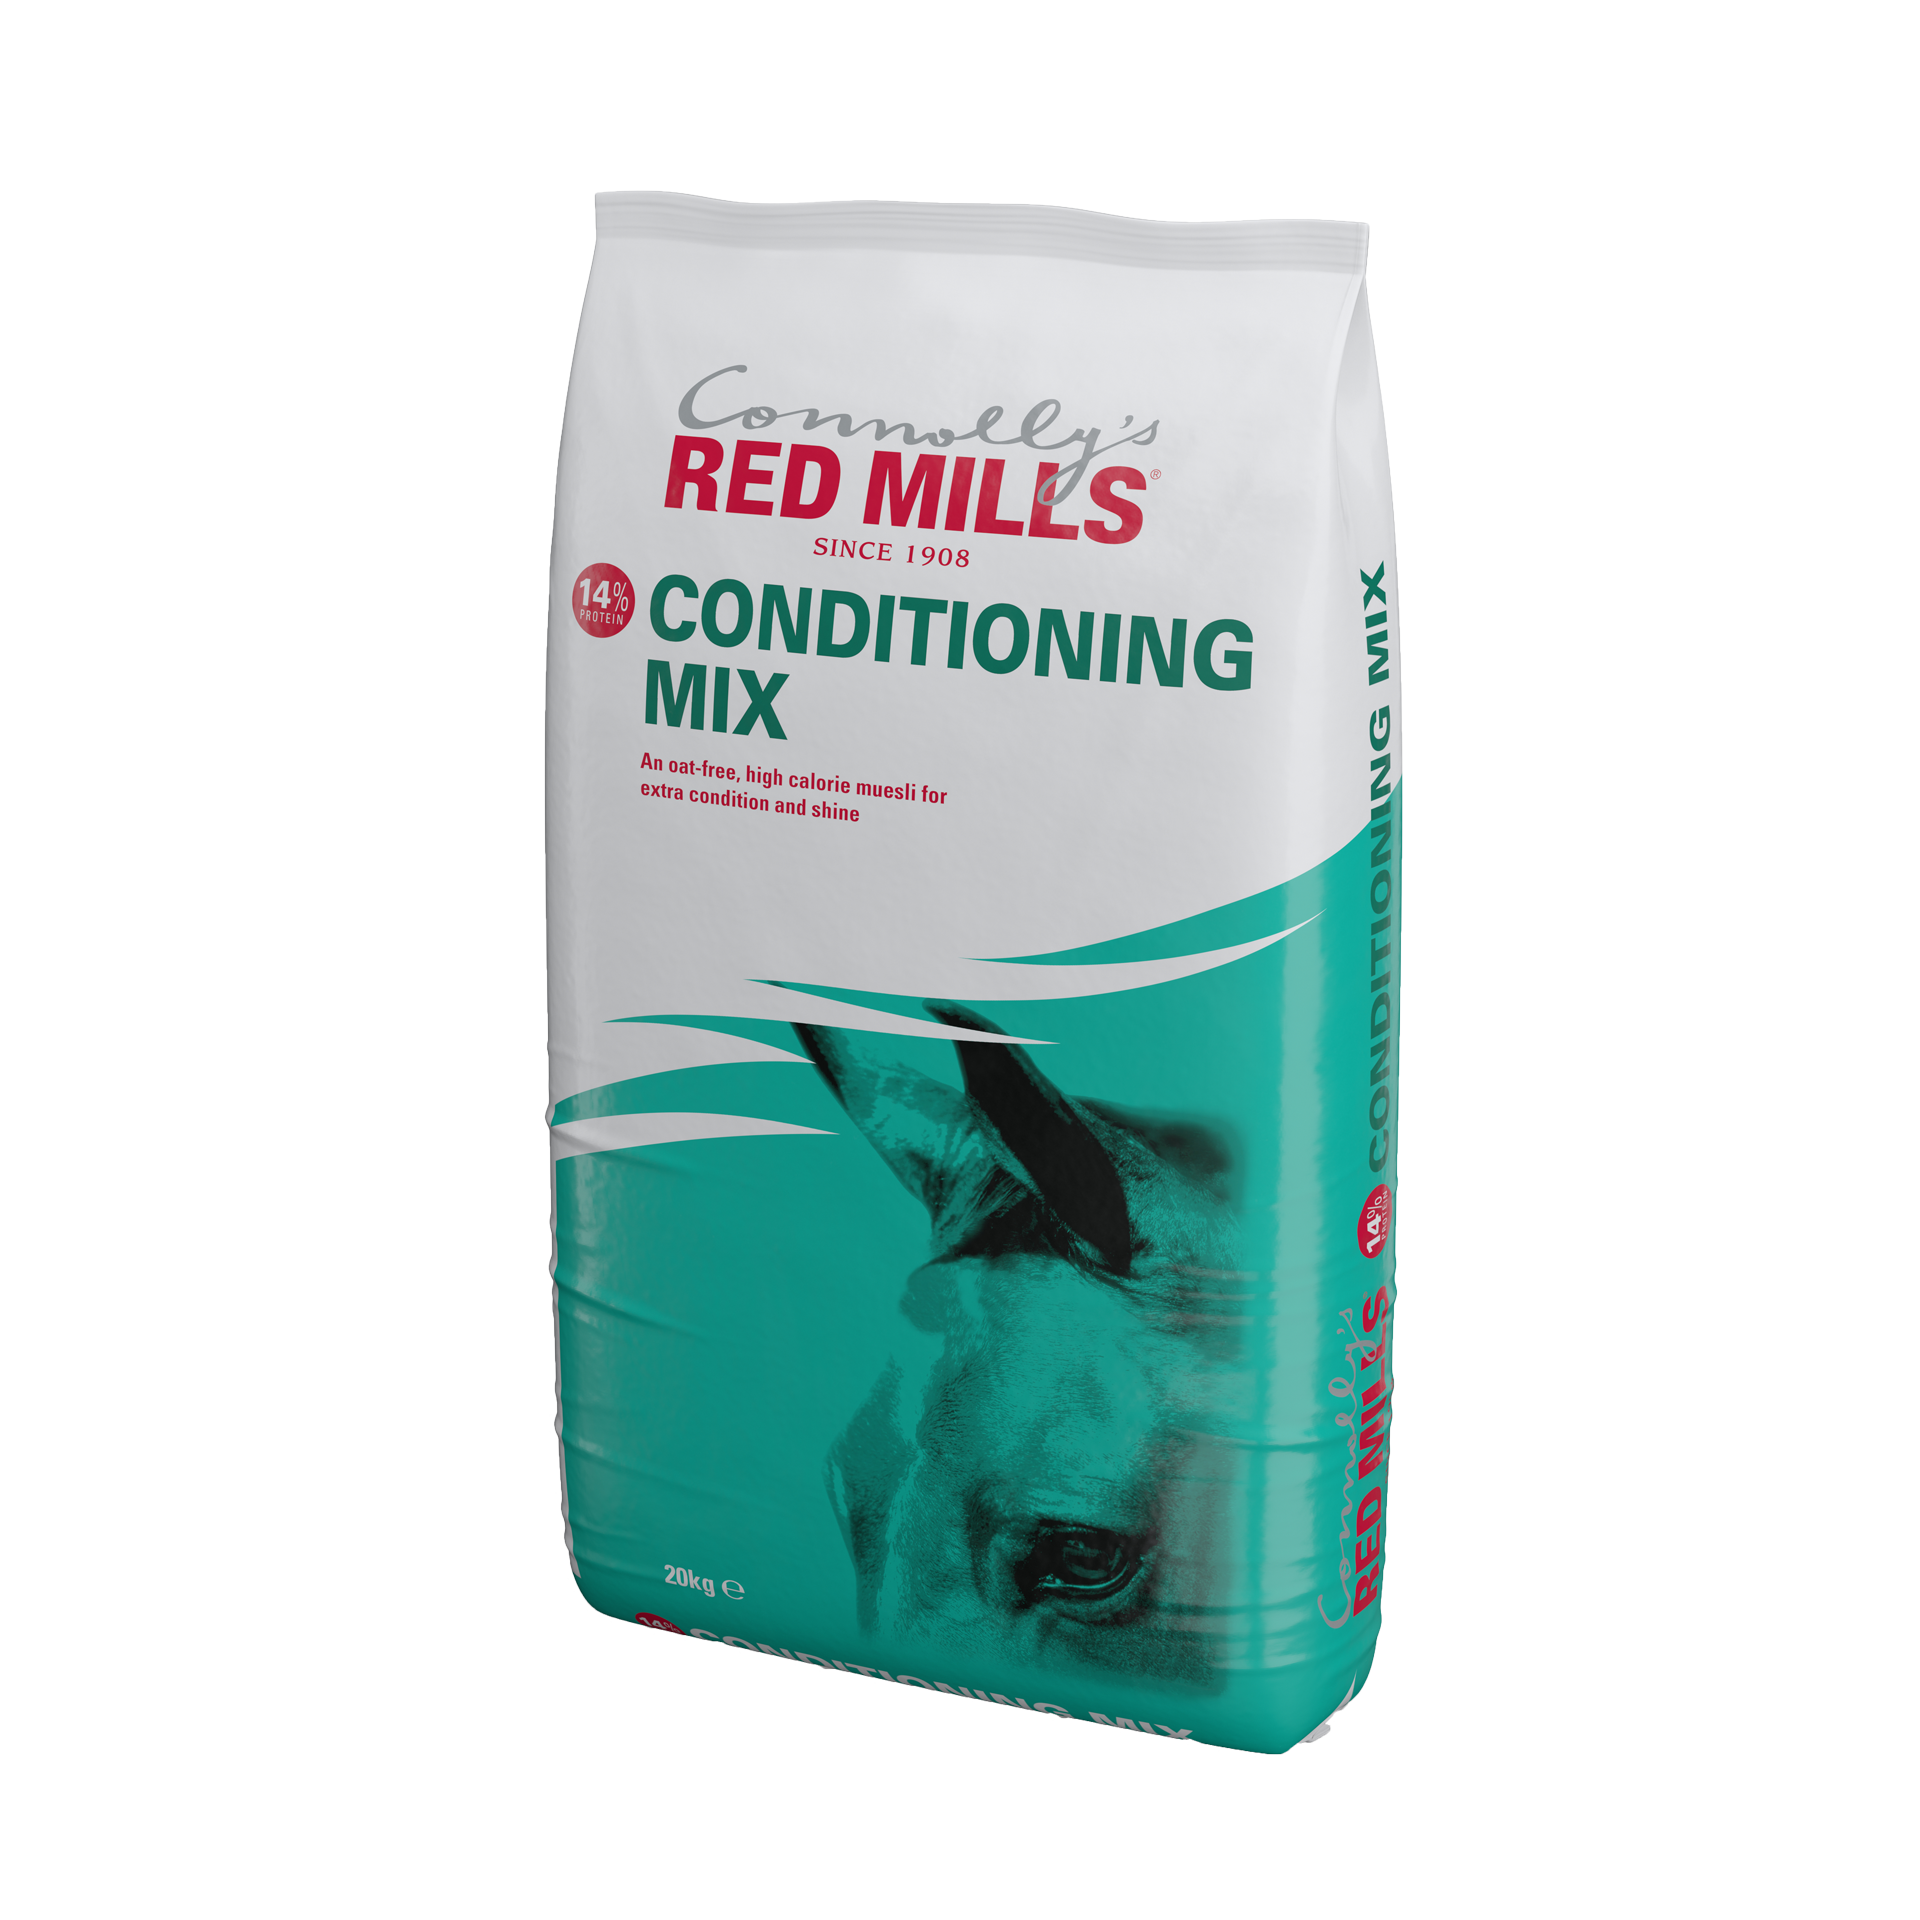 RED MILLS 14% Conditioning Mix